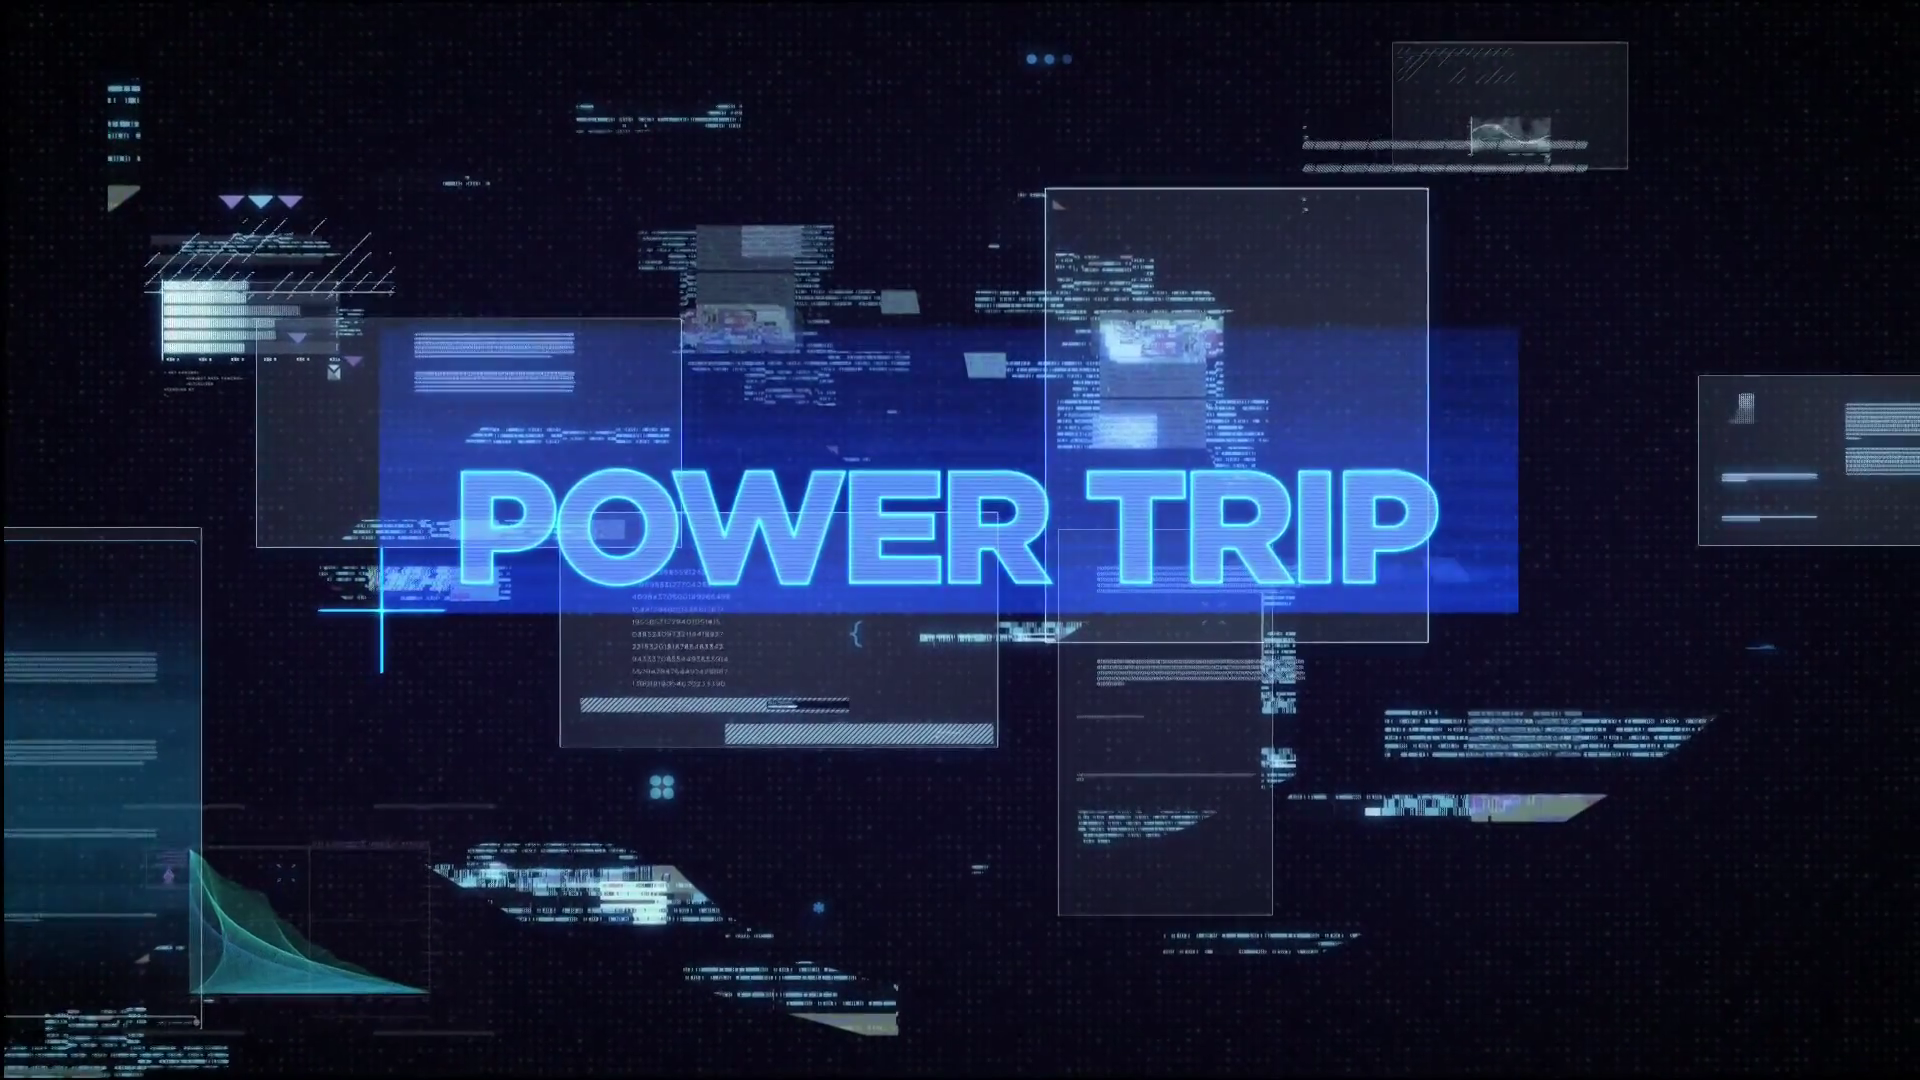 Pre-BB: Could Big Brother: Power Trip launch on June 5th?